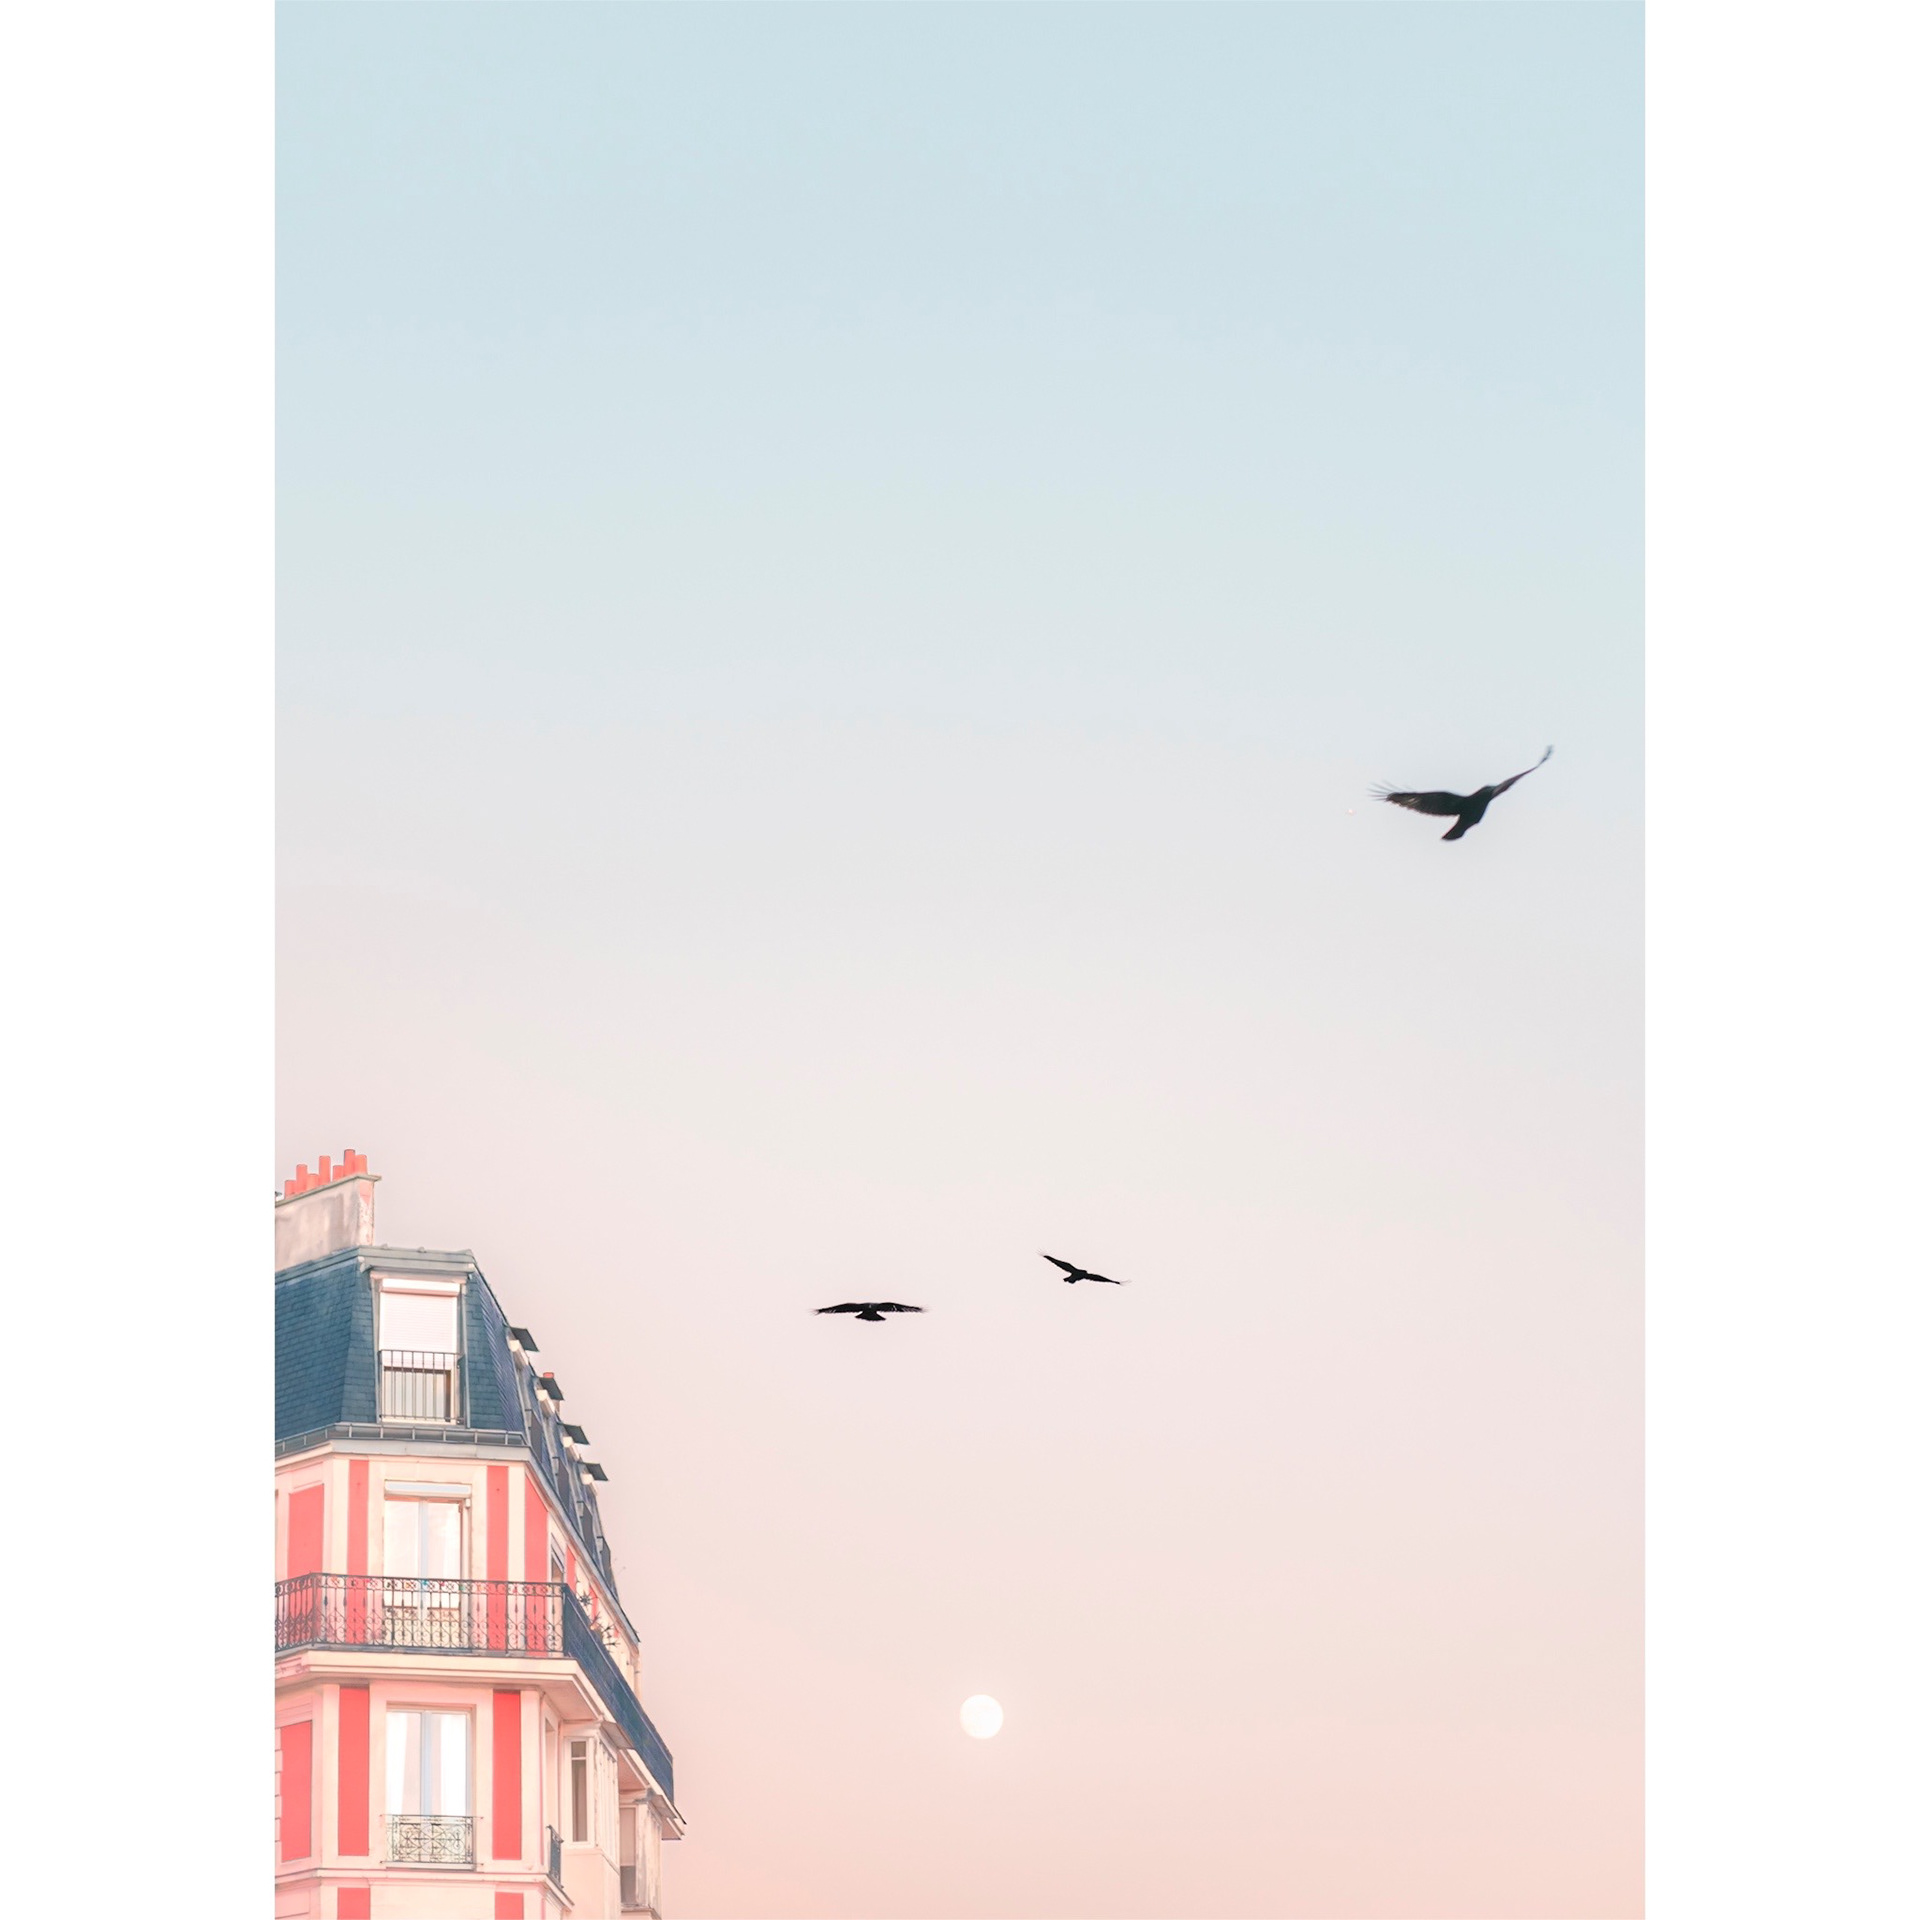 Photograph of the Sinking House on Montmartre hill with a dreamy soft blue aesthetic. Detail of tiny birds and the moon. Paris, France 